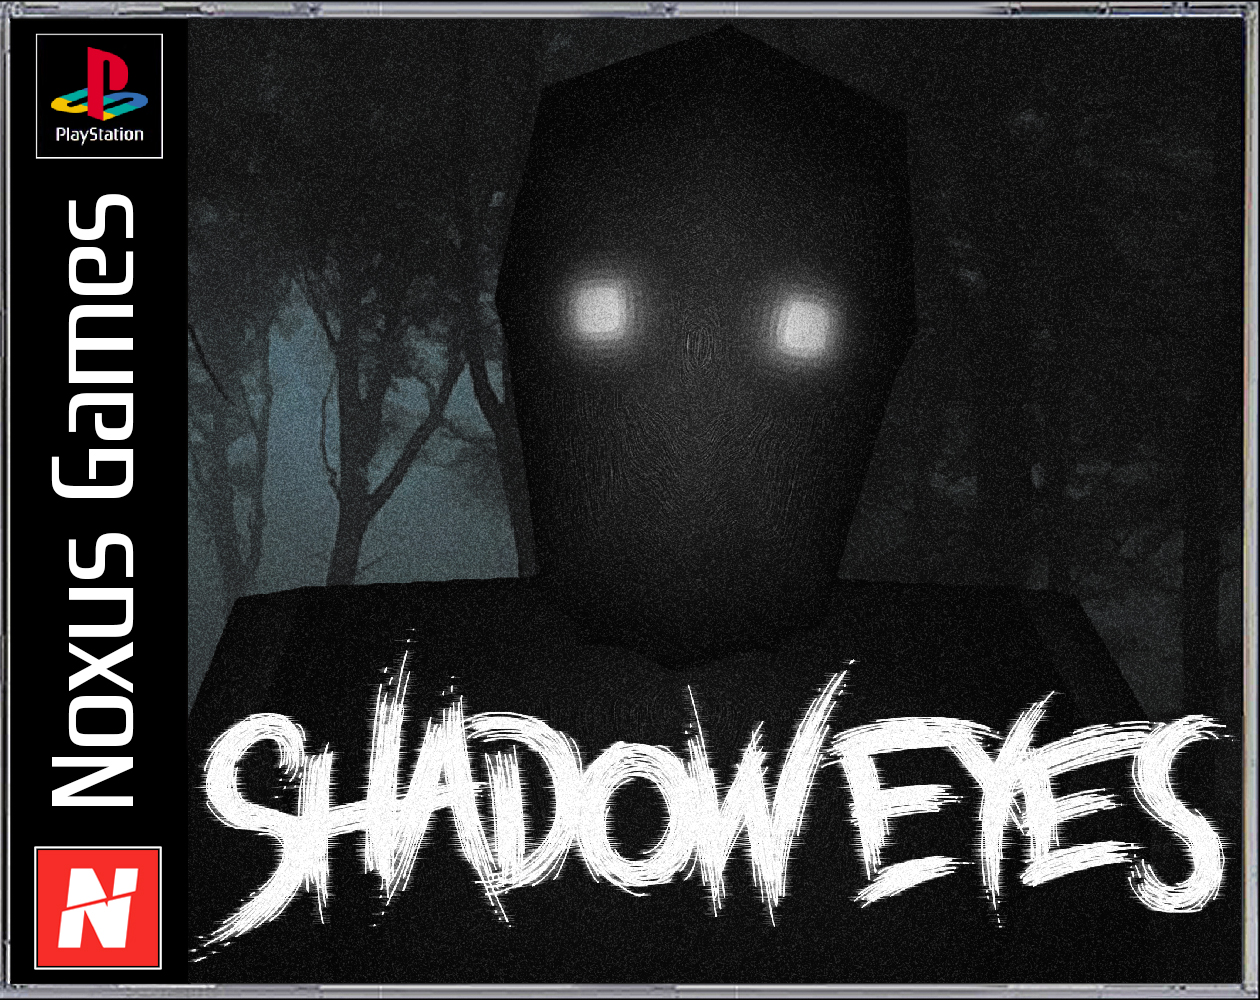 HOW TO DOWNLOAD EYES THE HORROR GAME IN PC